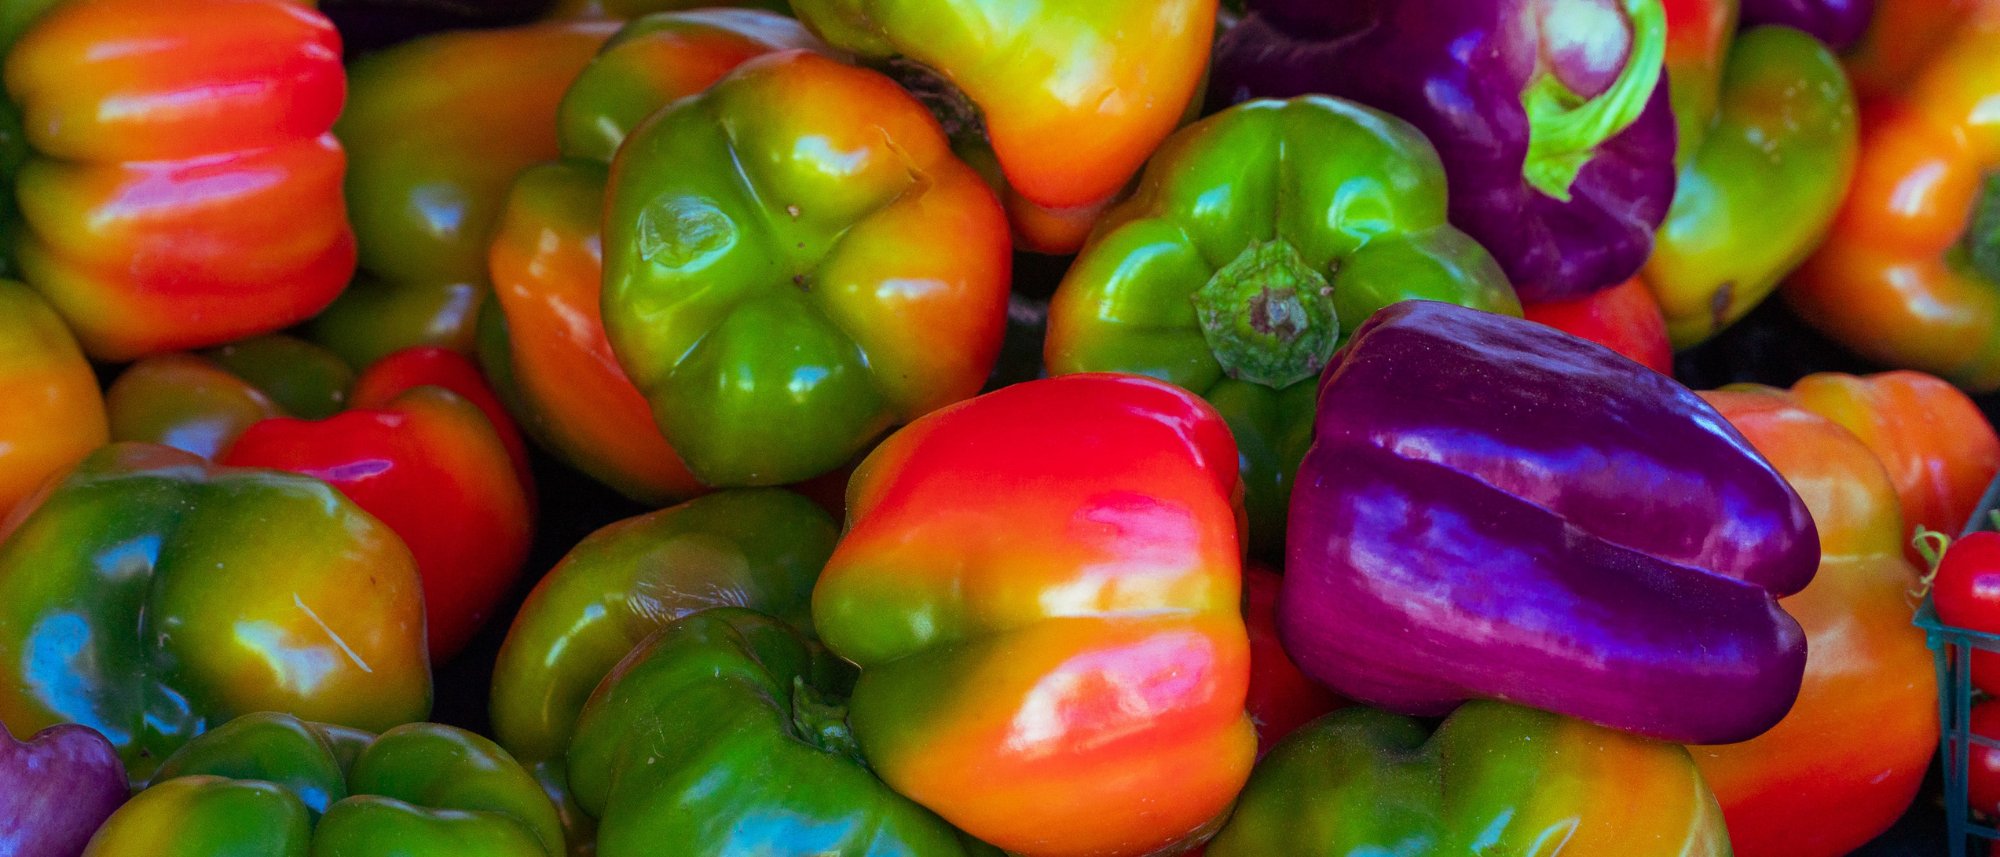 Grow delicious sweet bell and spicy peppers